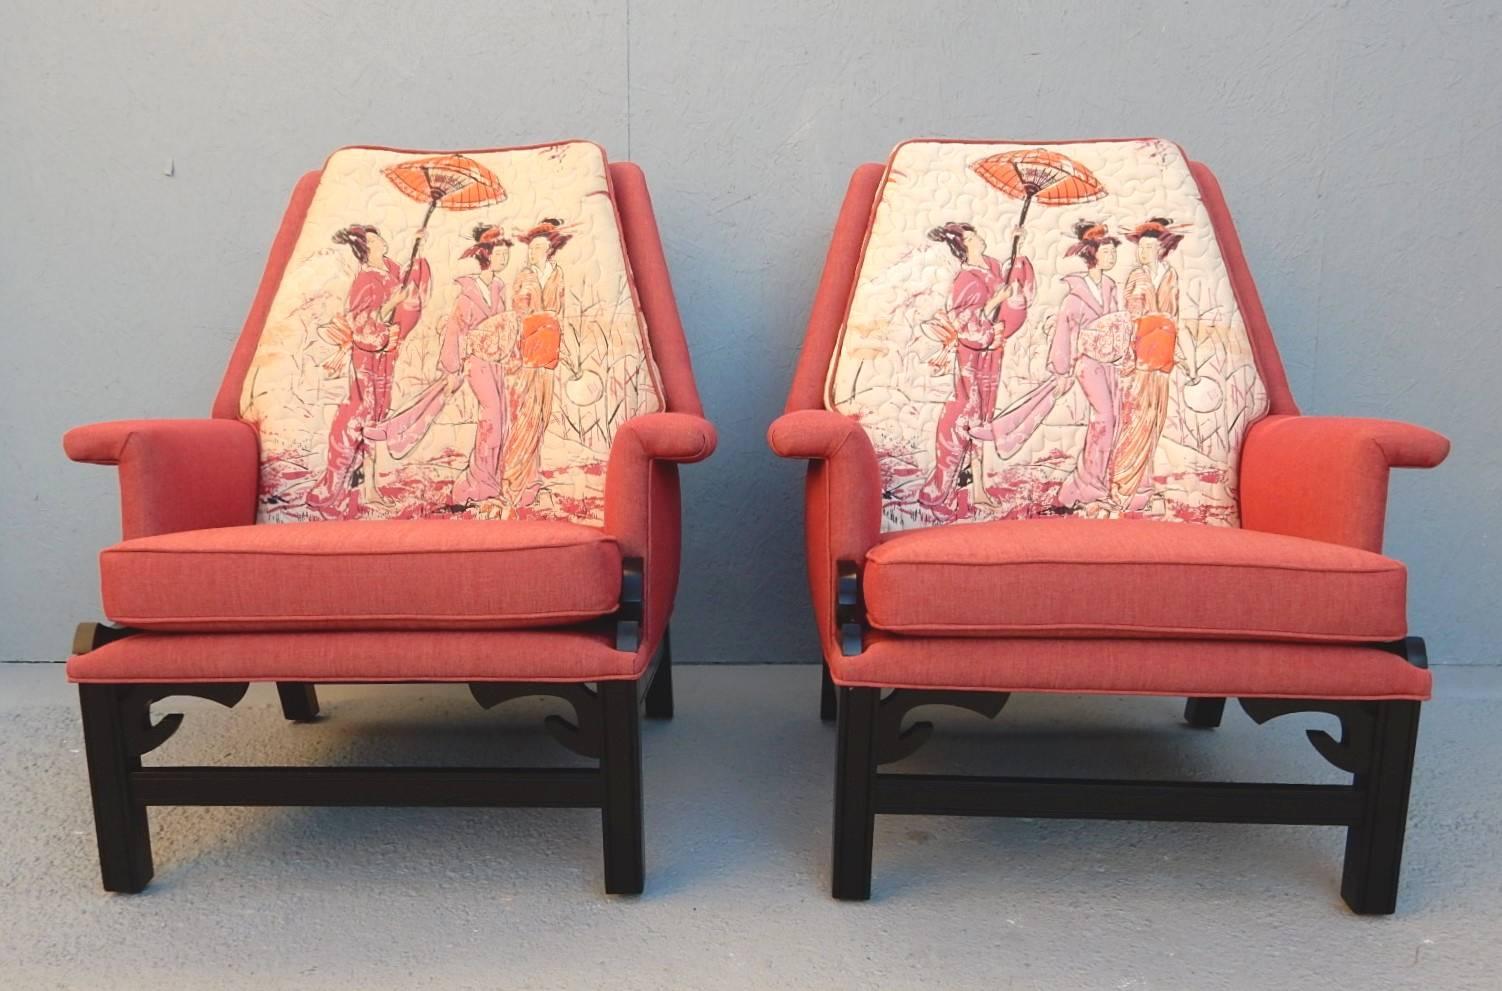 Fabulous pair of lounge chairs designed in the style of James Mont, circa 1950s.
These were just reupholstered including new foam, webbing and fresh painted black lacquer however the original Geisha girl back cushion was preserved.
Solid, super